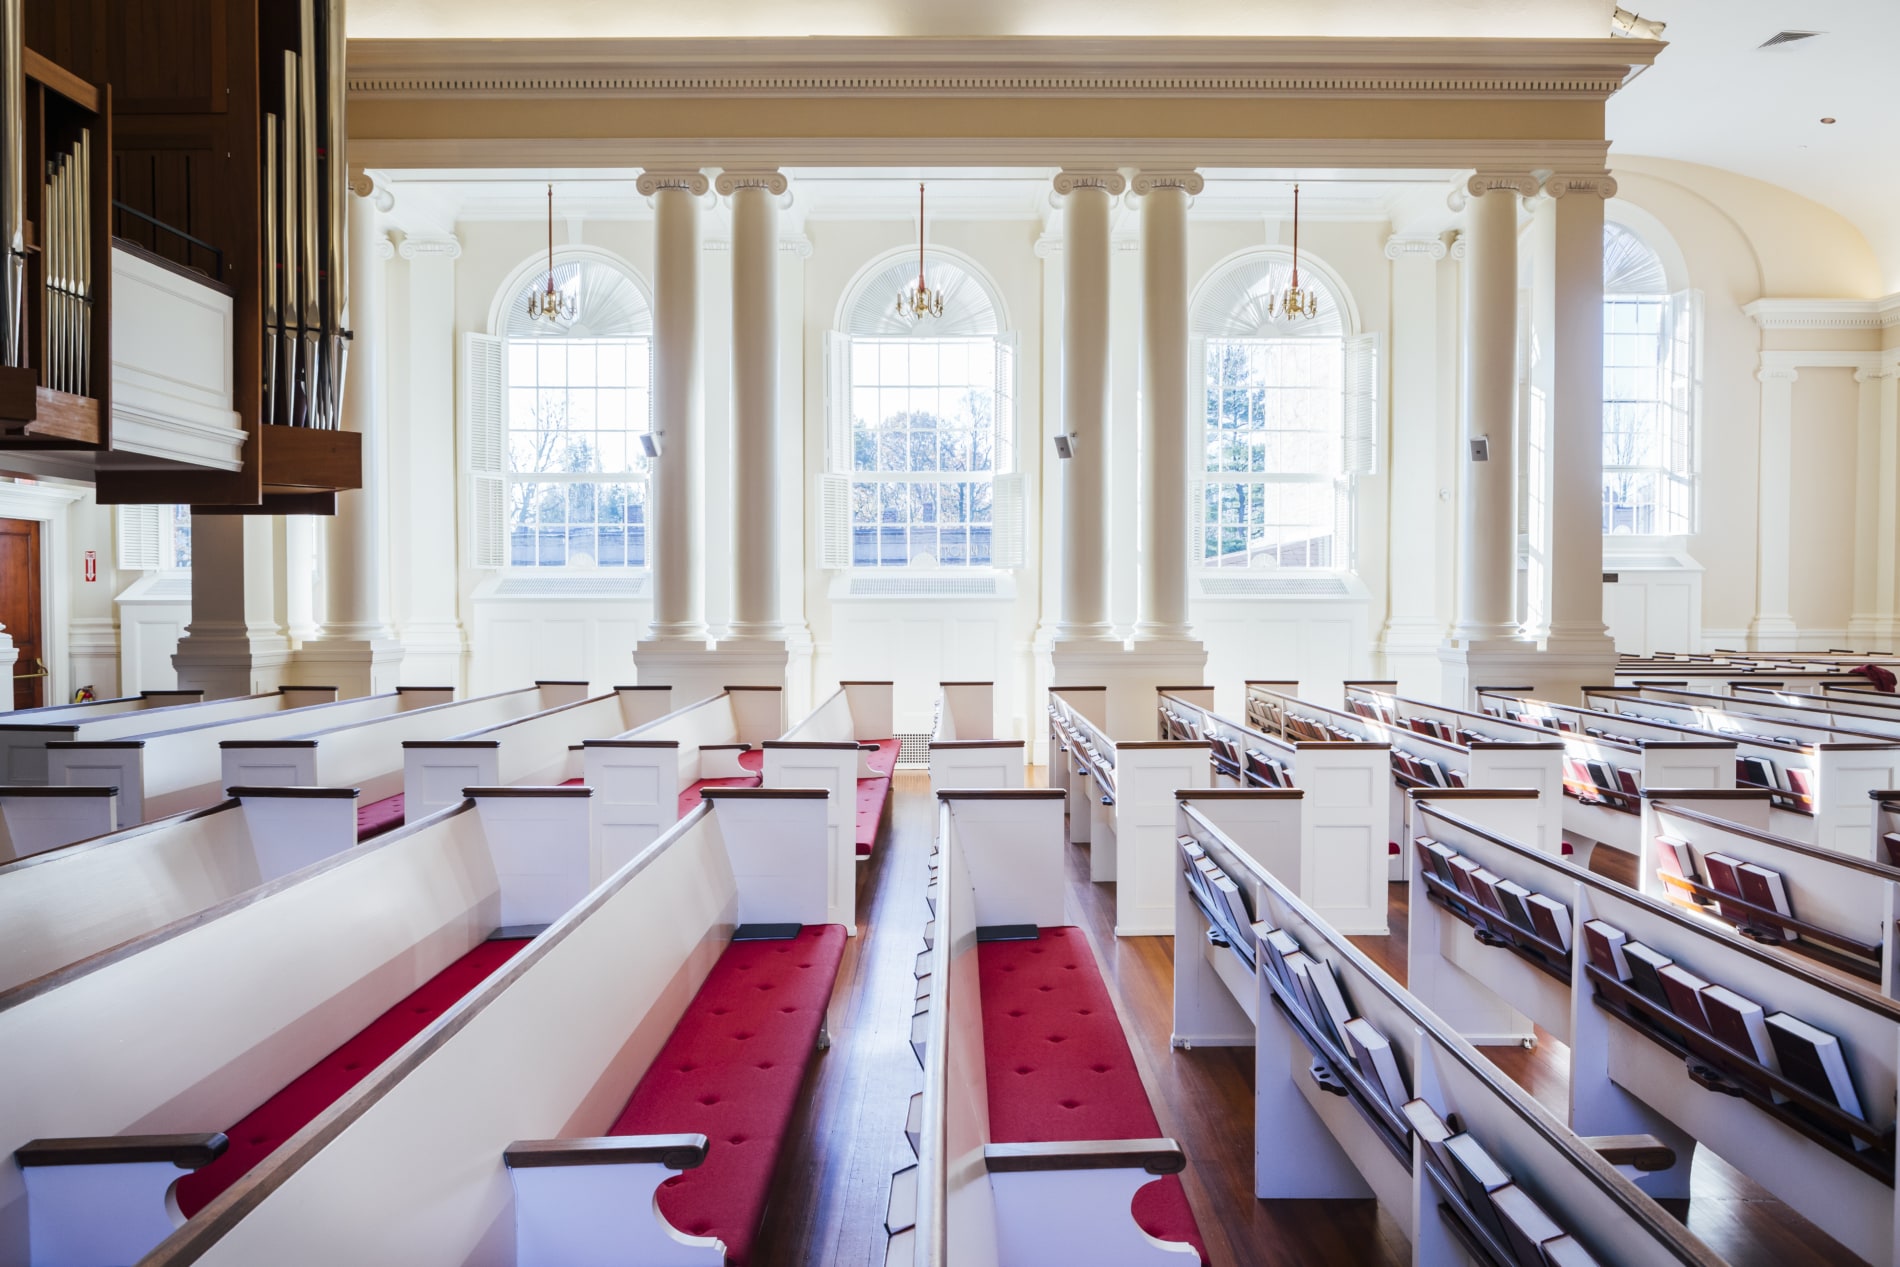 Interior of the sanctuary of Wellesley Village church showing pews, organ pipes, and clear glass windows.